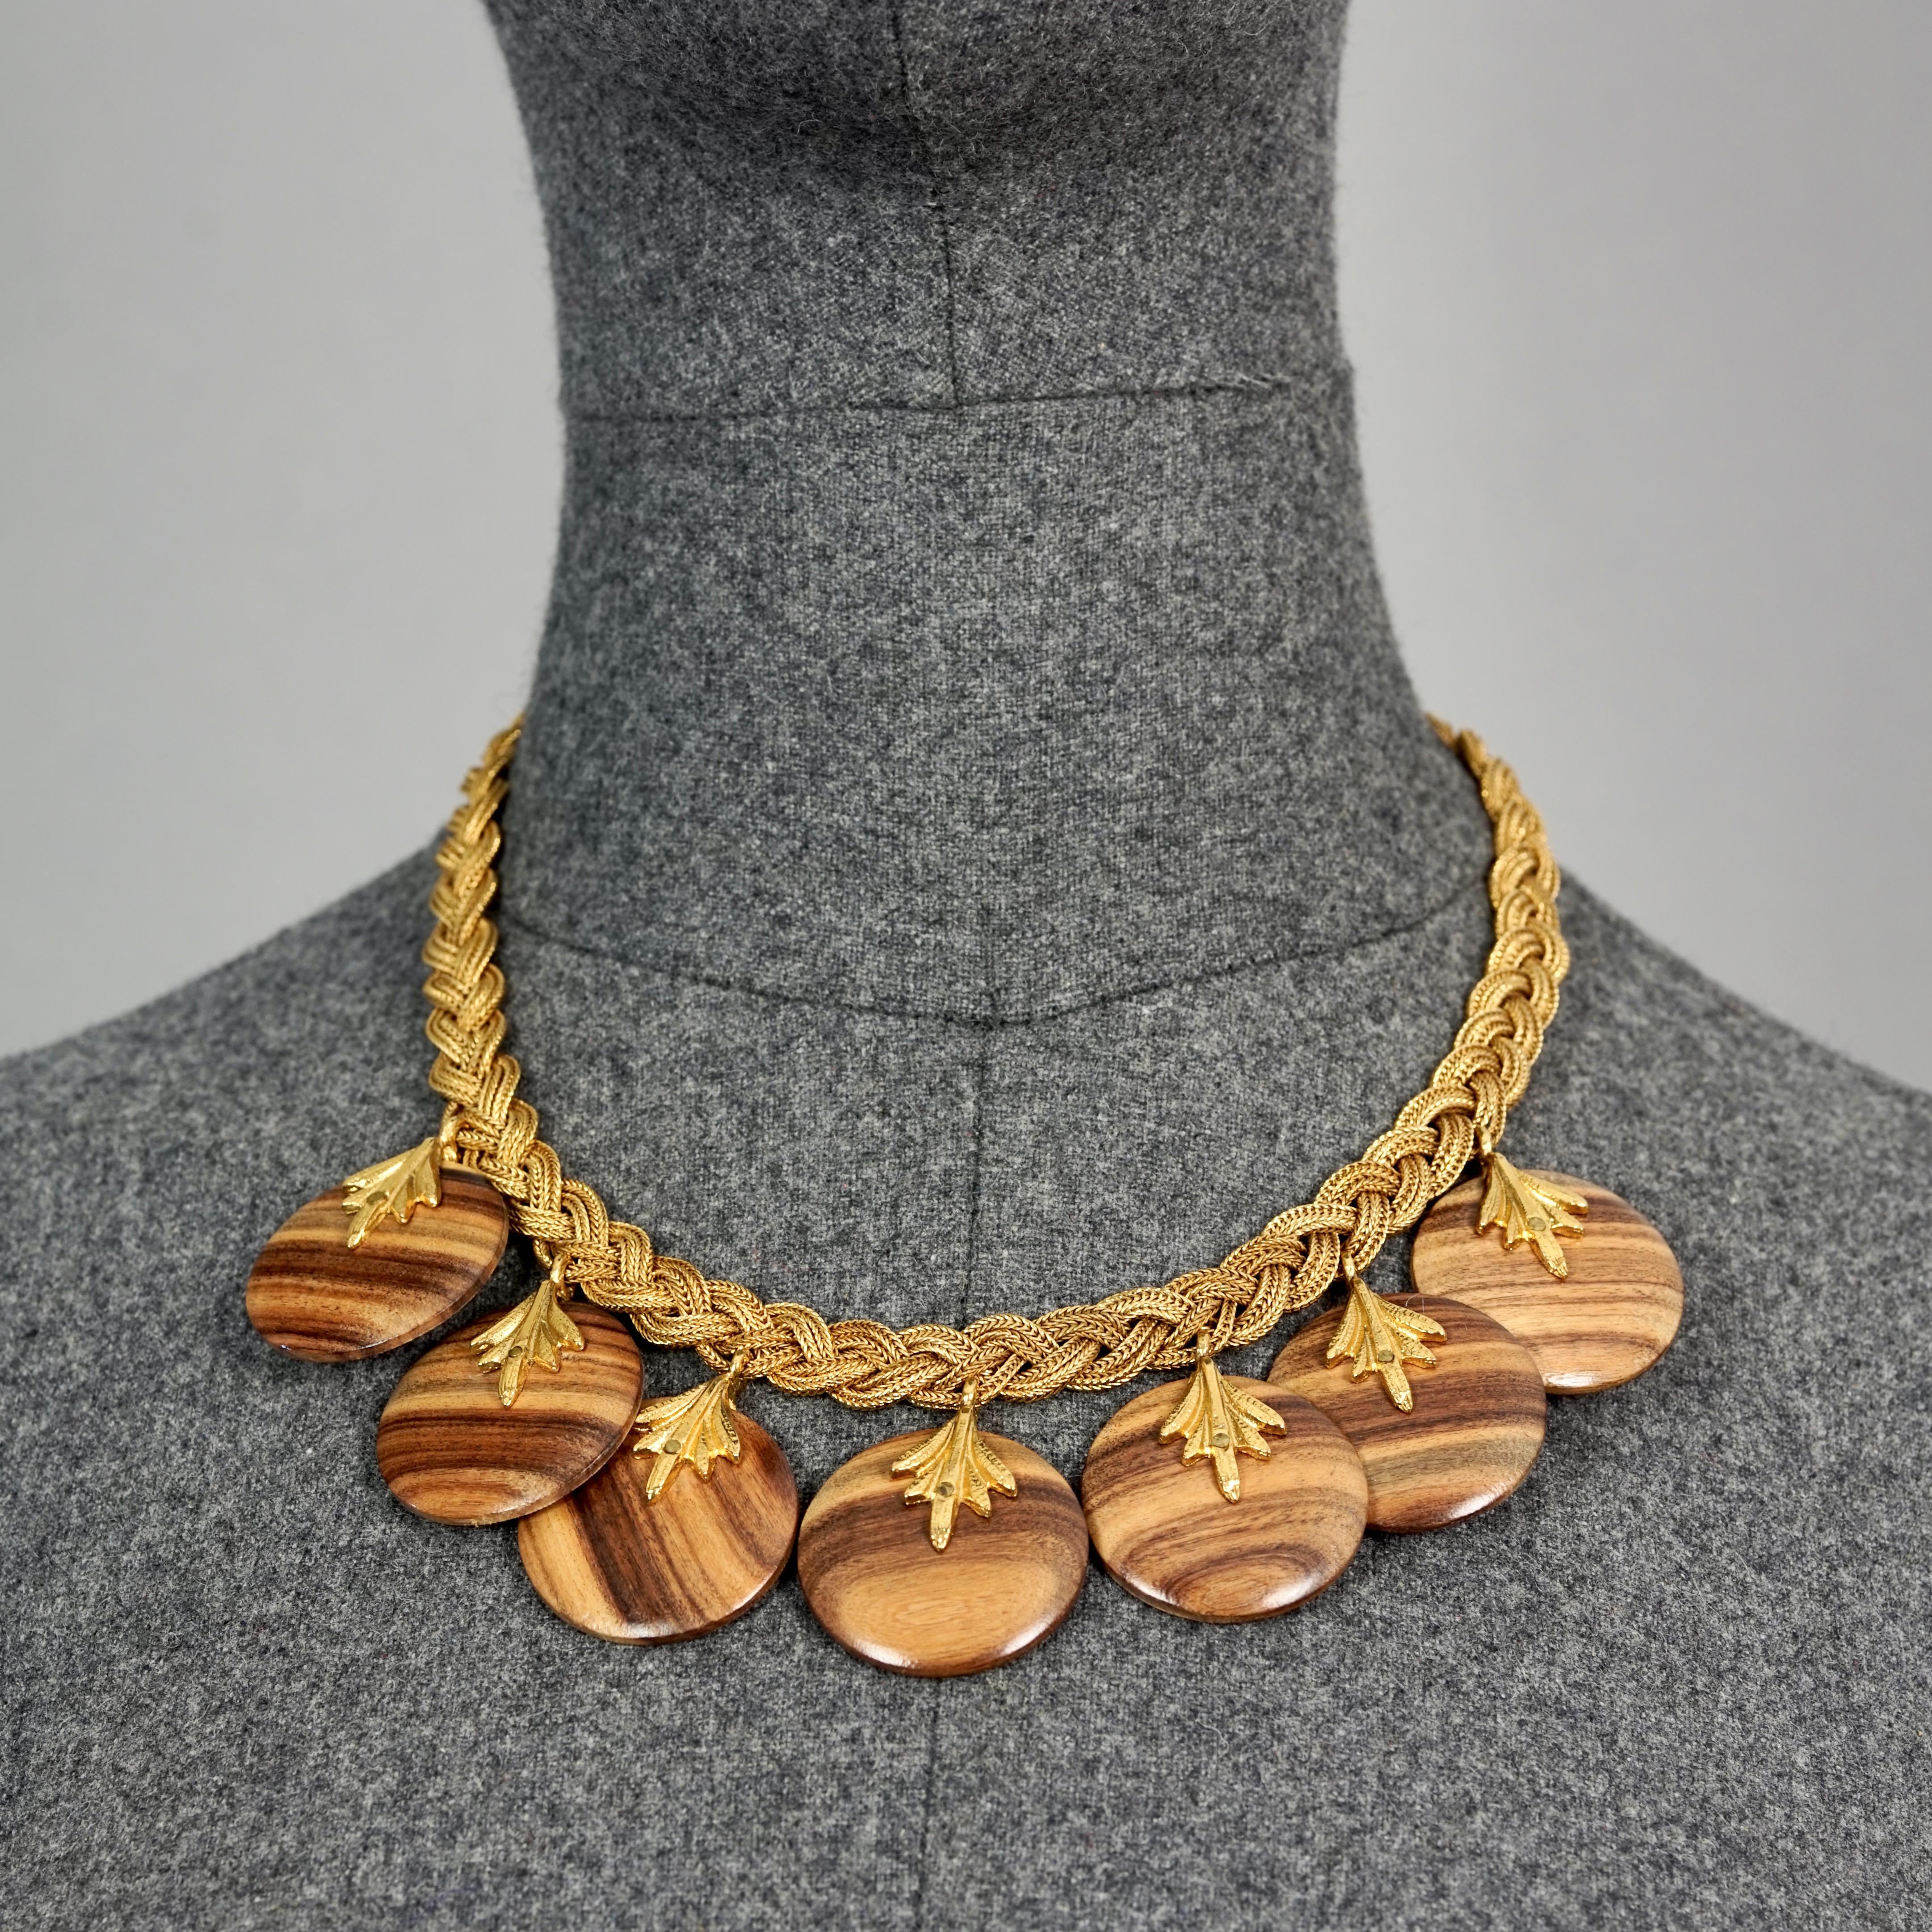 Vintage ROBERT GOOSSENS PARIS Wooden Disc Charms Gilt Braided Necklace

Measurements:
Drop Height: 1.77 inches (4.5 cm)
Medallion Diameter: 2.16 inches (5.5 cm)
Maximum Length: 15.75 inches to 18.89 inches (40 cm to 48 cm)

Features:
- 100%